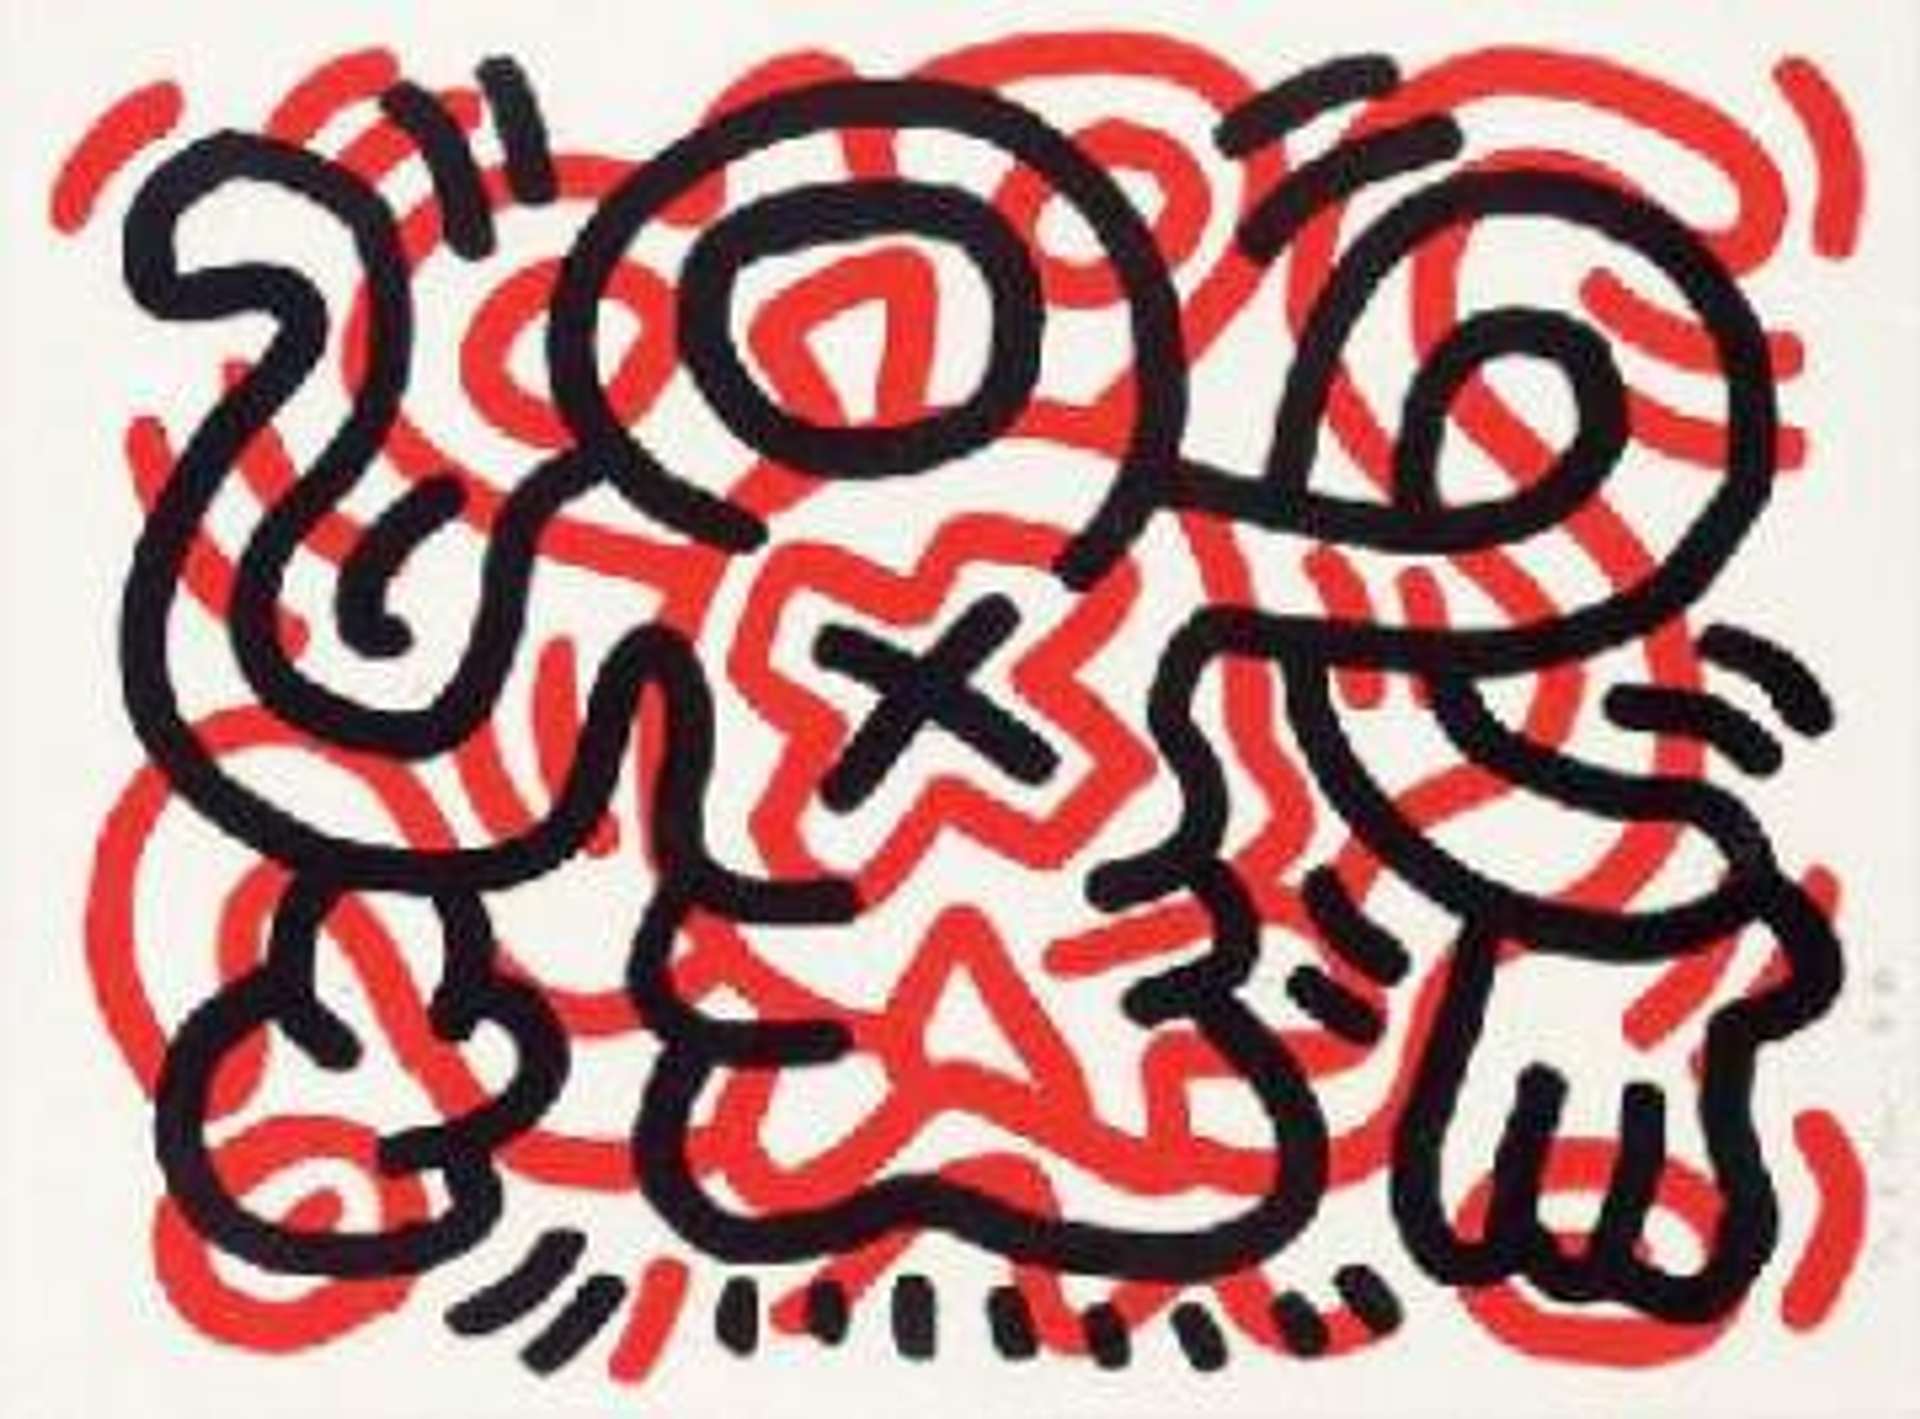 Ludo 3 - Signed Print by Keith Haring 1985 - MyArtBroker